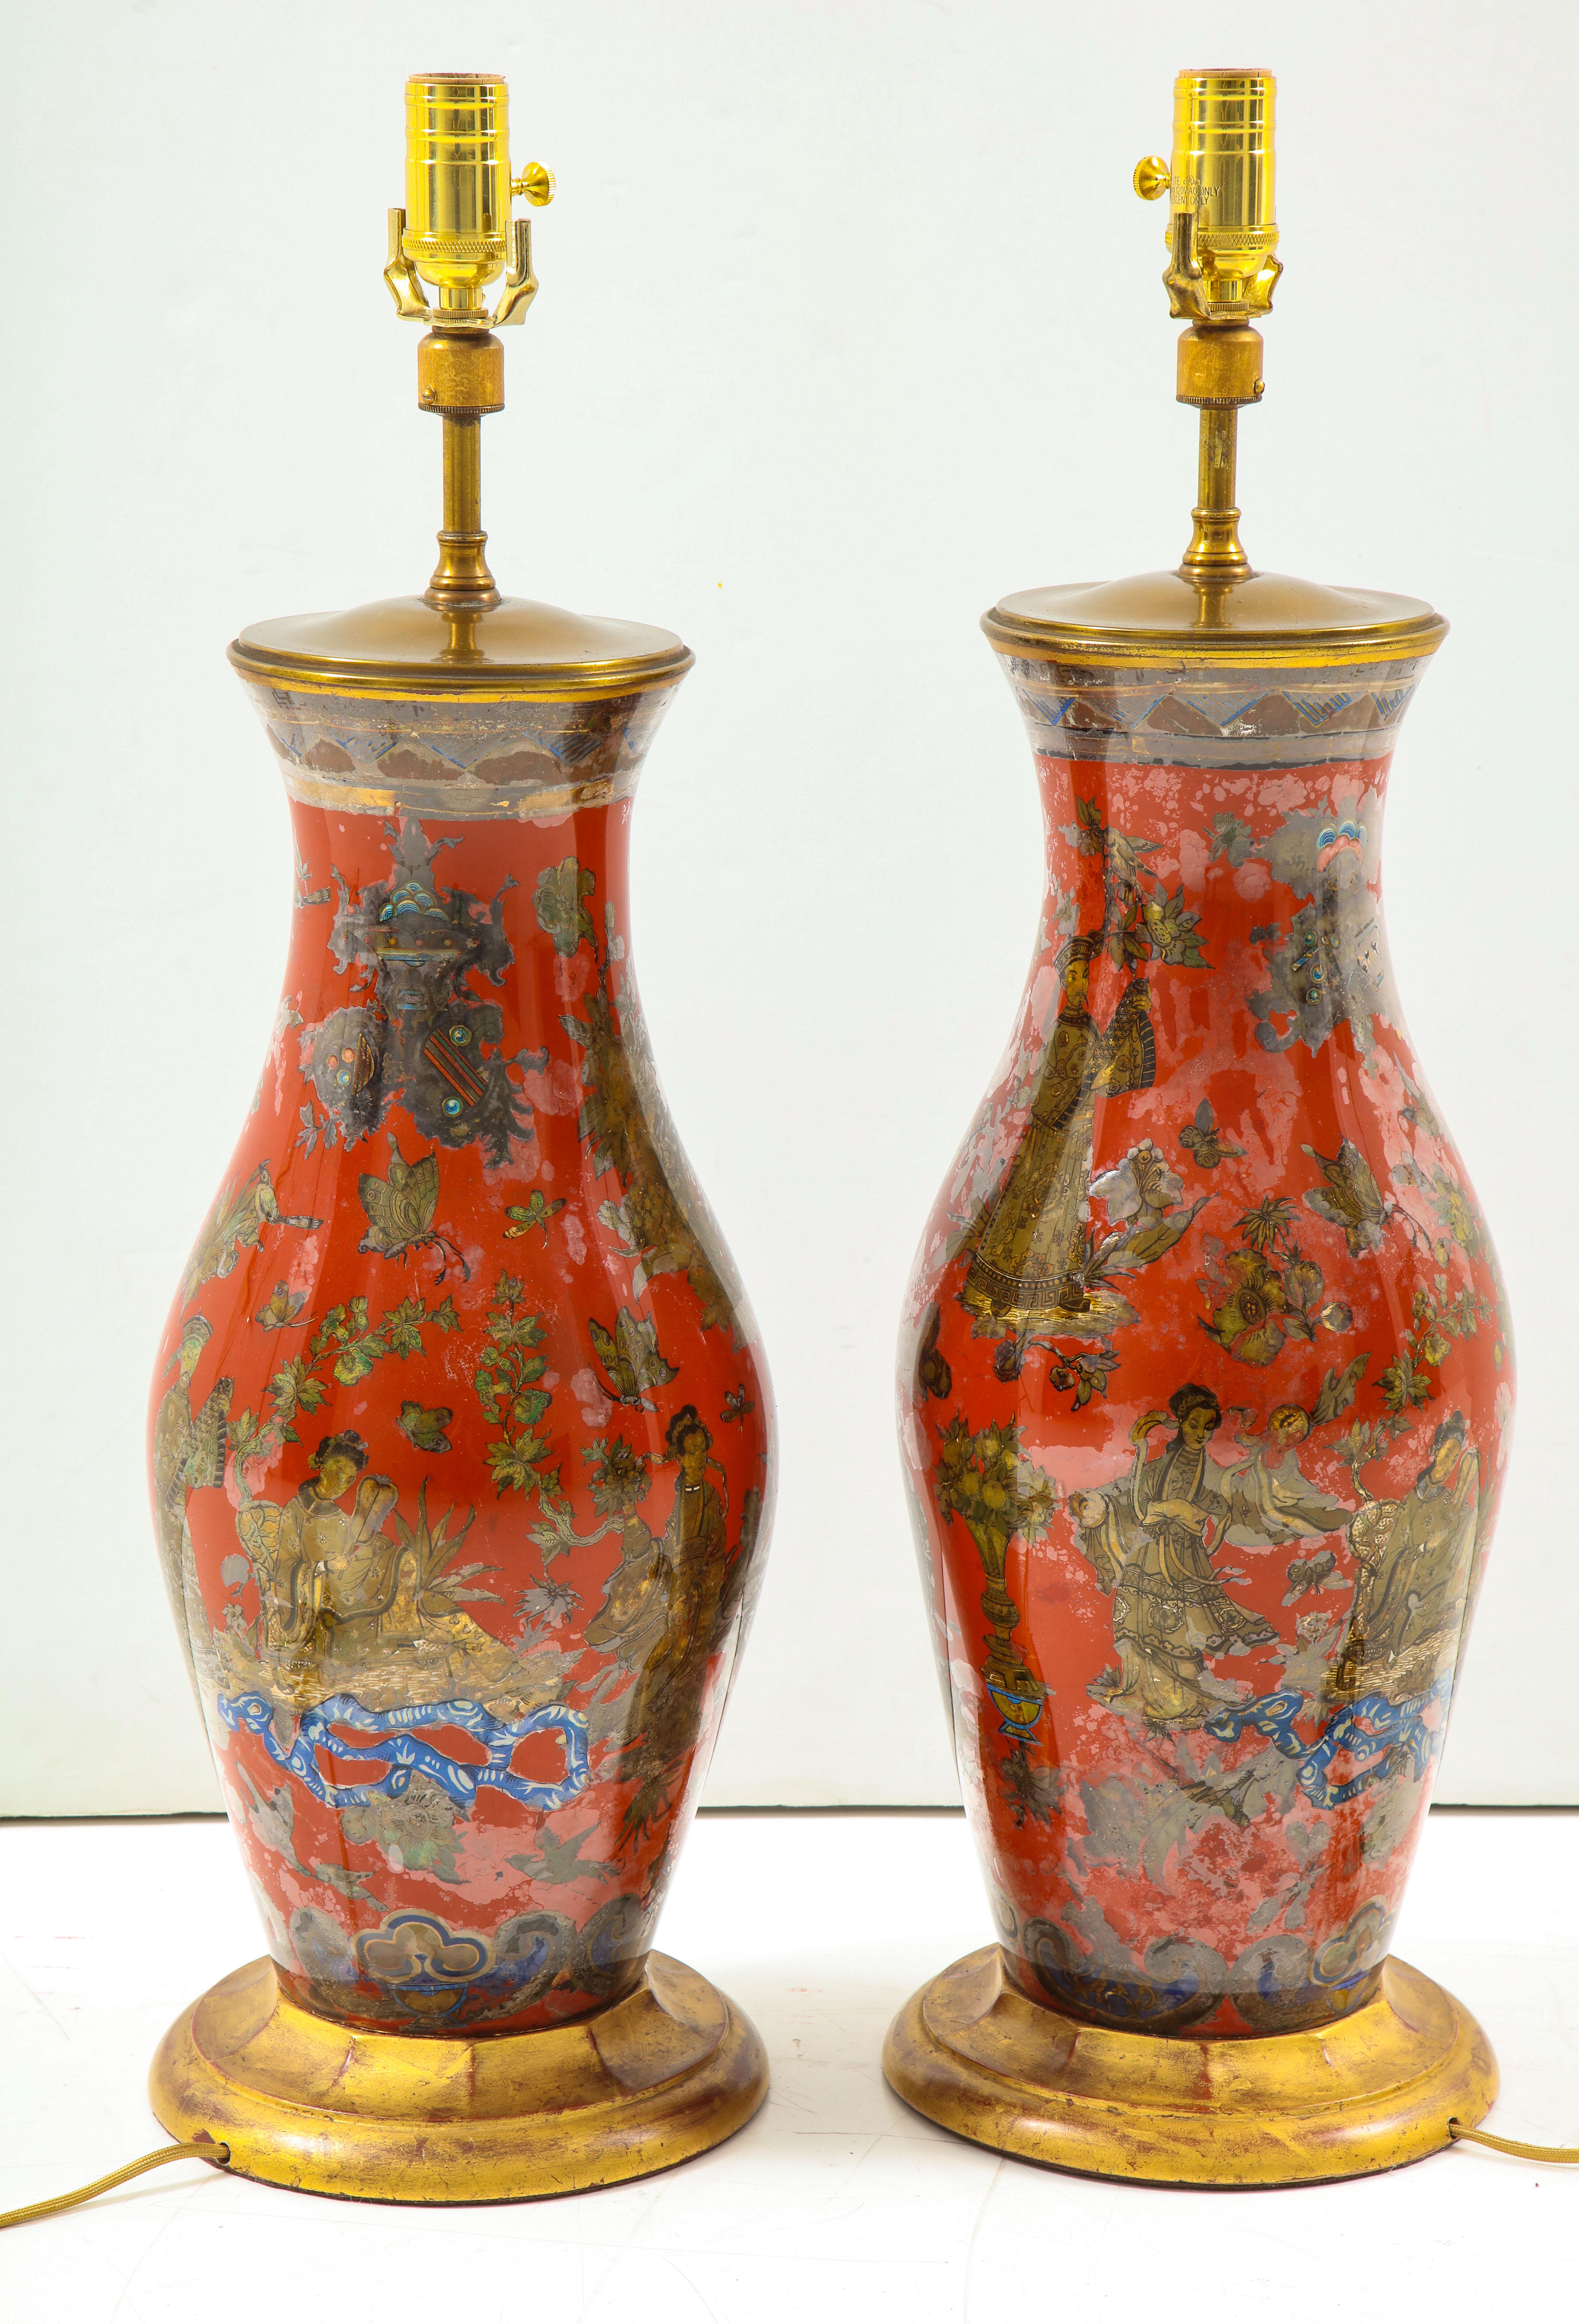 A pair of vintage chinoiserie table lamps, painted in a tomato red with giltwood base, circa 1970s.